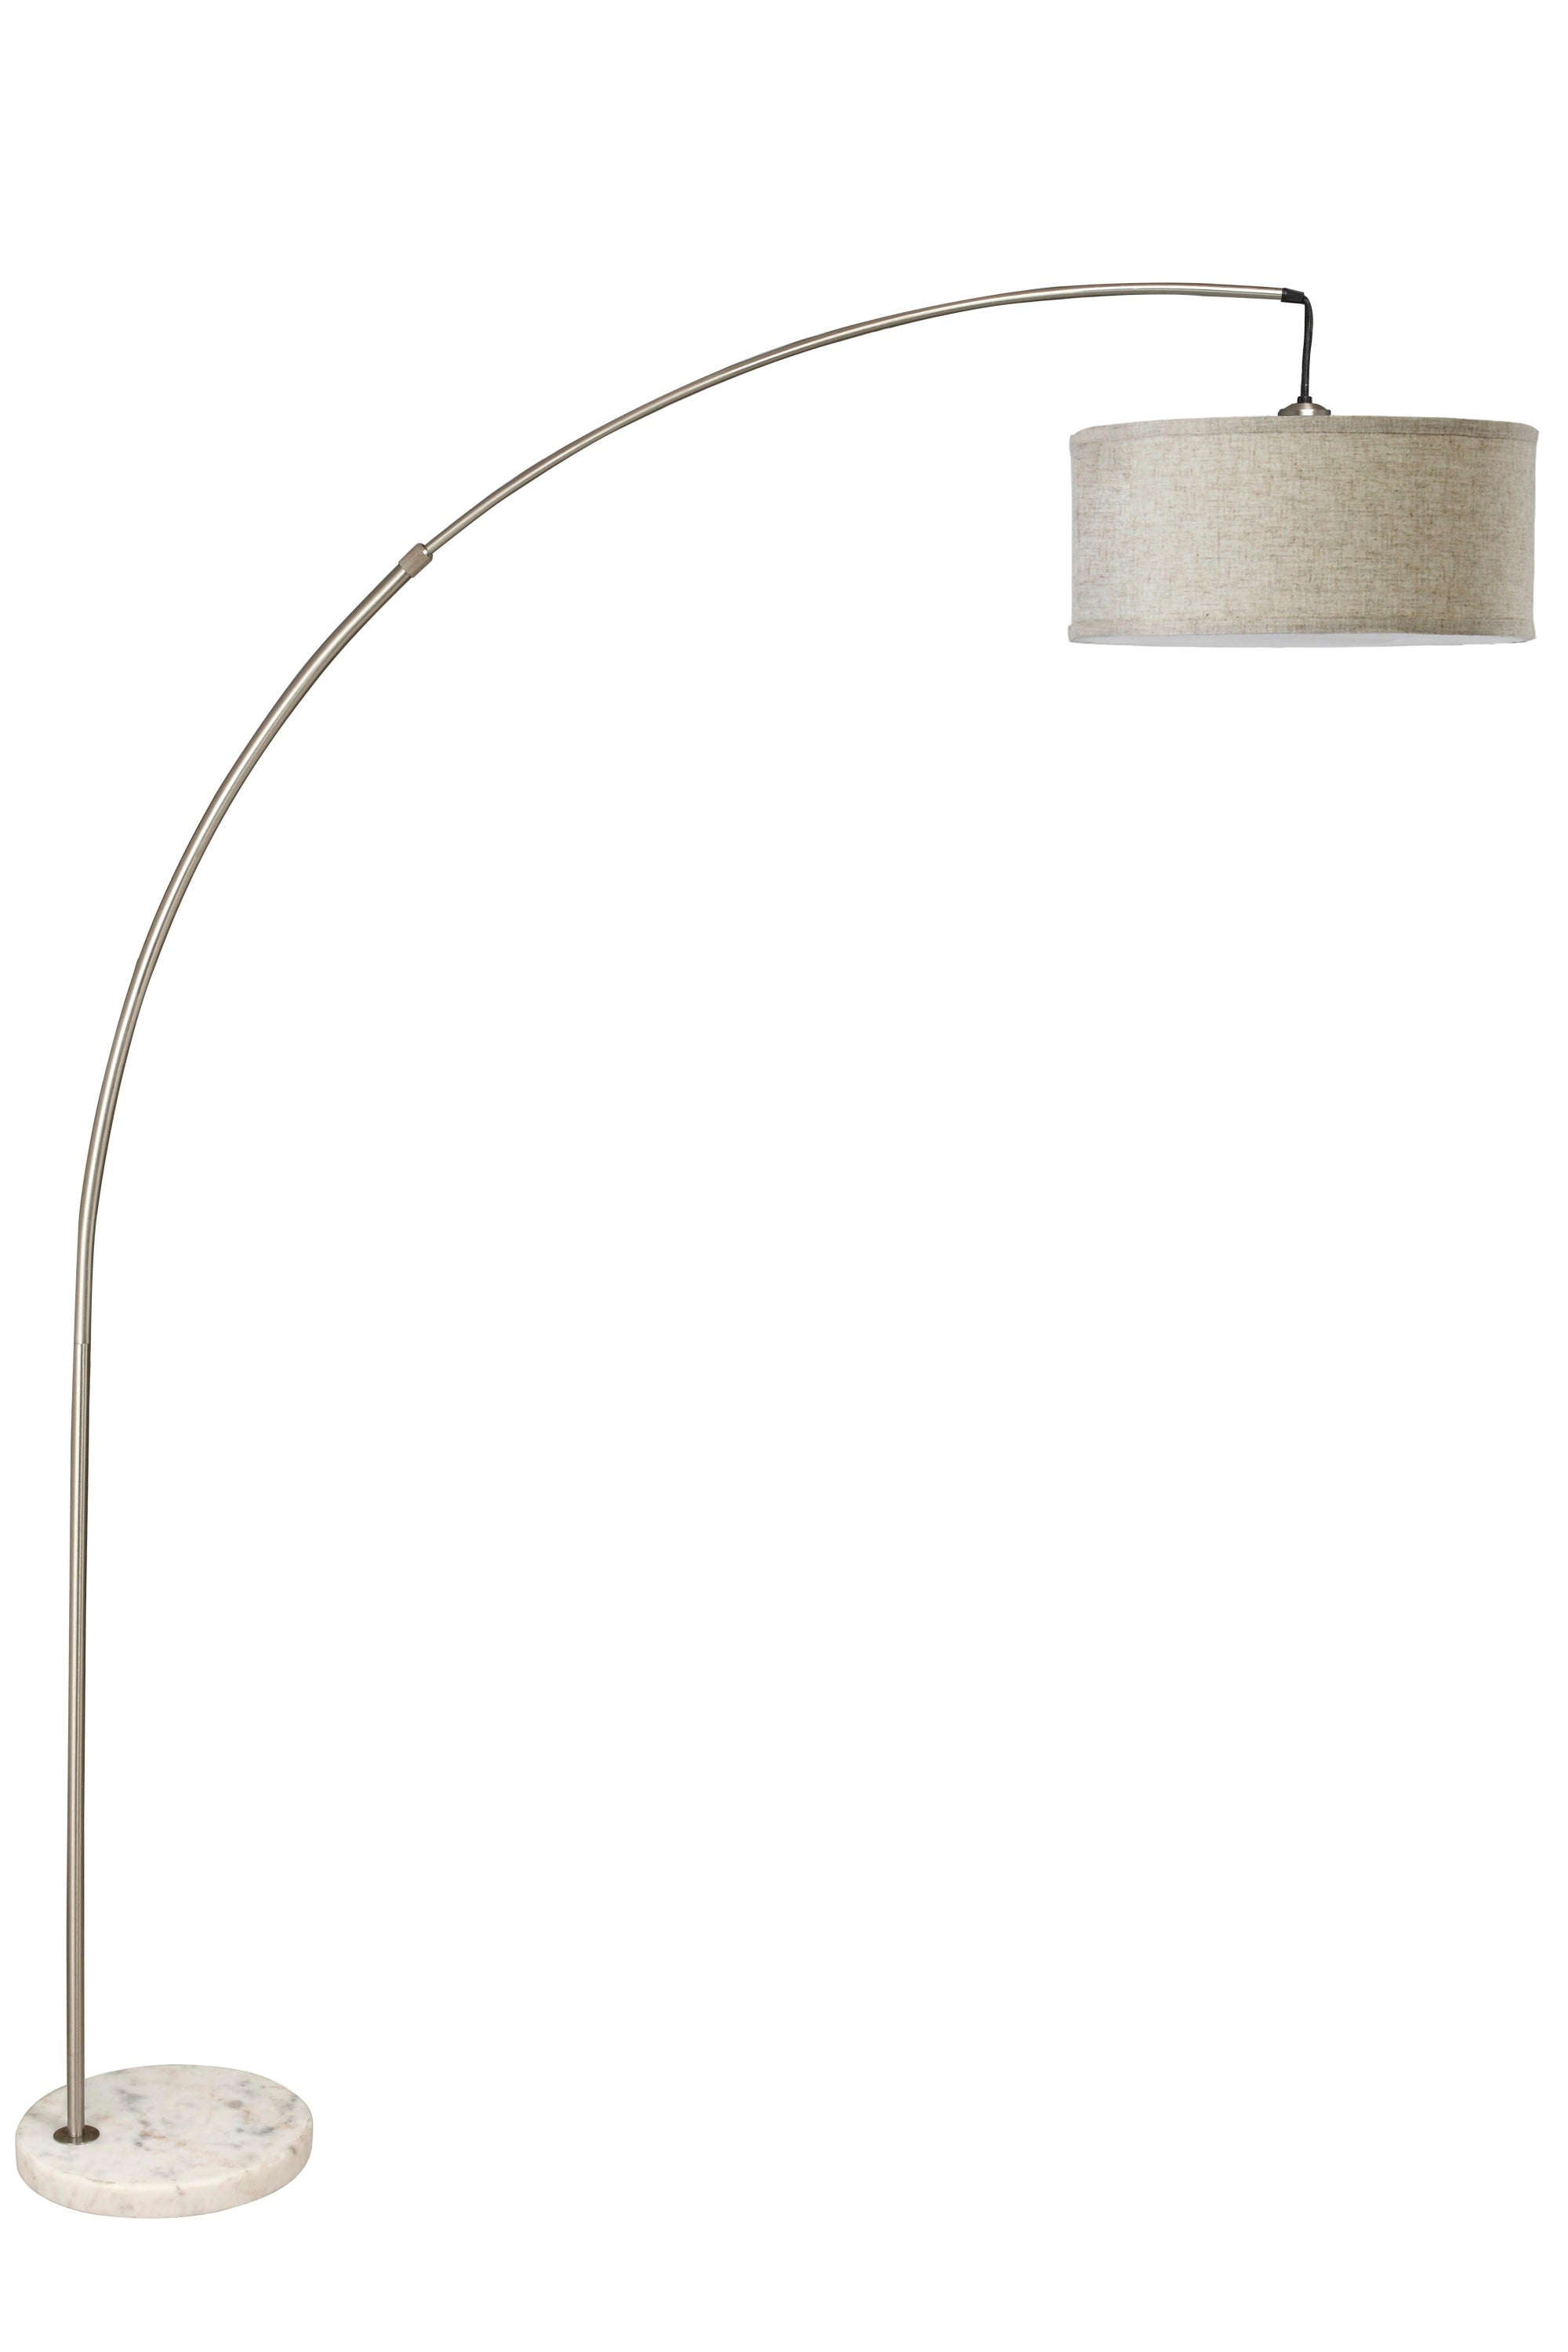 78" Silver Arch Floor Lamp with KD Shade with Double Box - Brushed Nickel